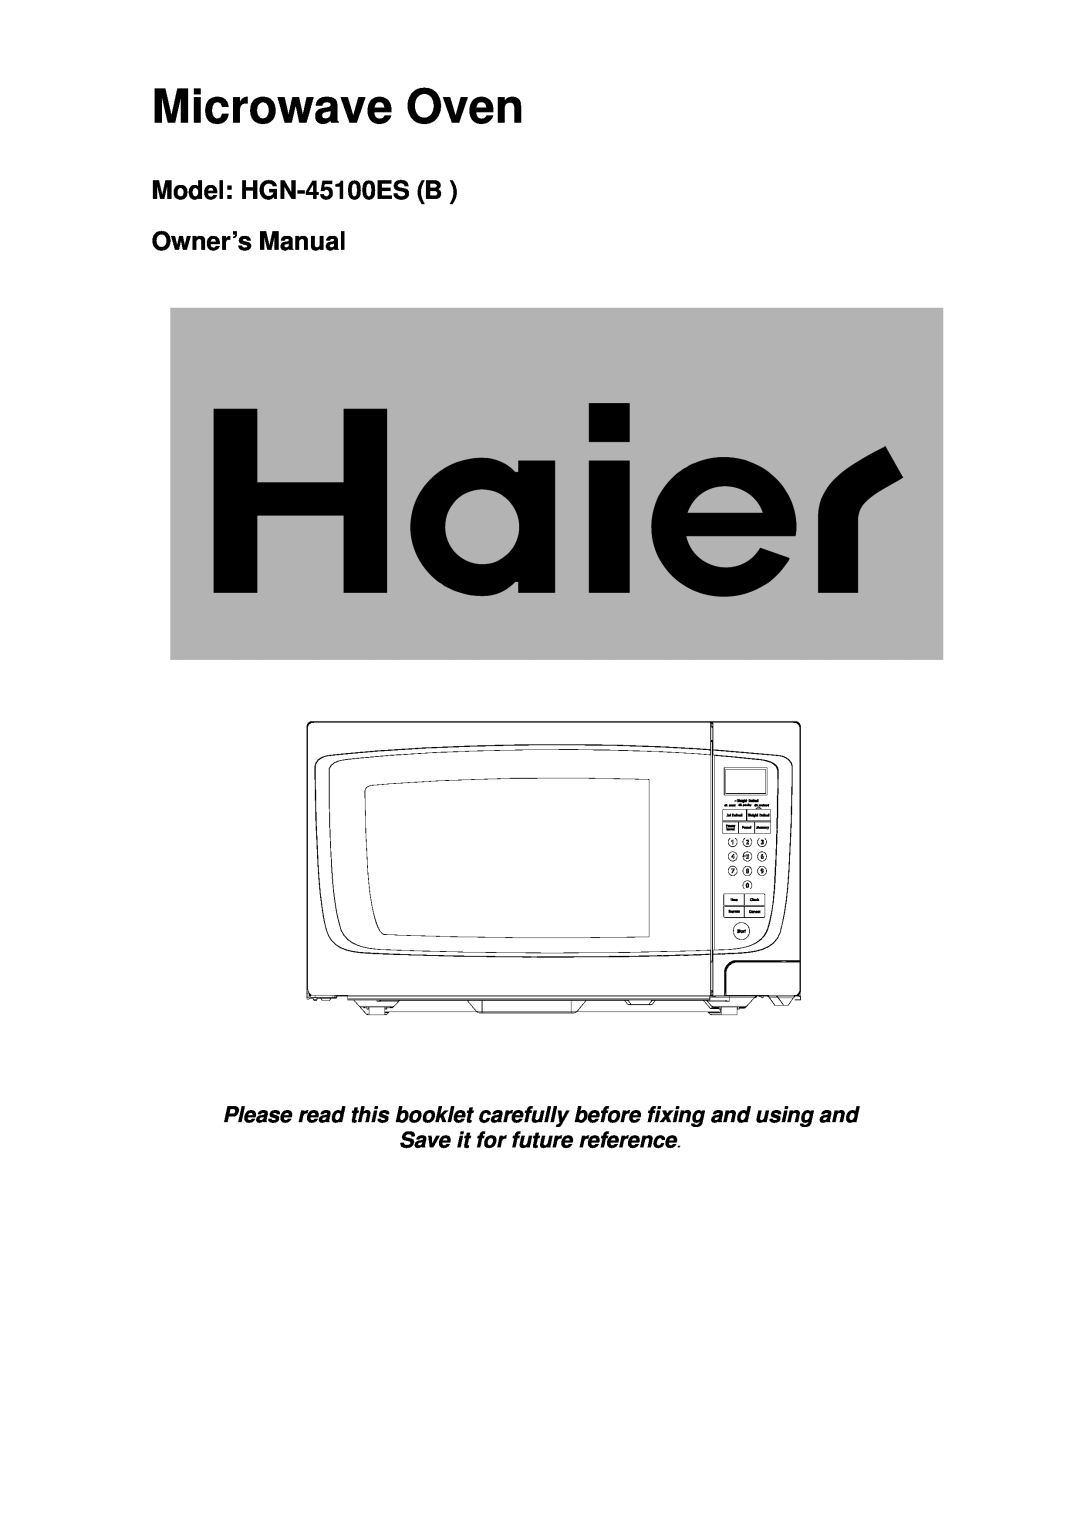 Haier HGN-45100ES ( B ) owner manual Microwave Oven, Model: HGN-45100ES B Owner’s Manual, Save it for future reference 